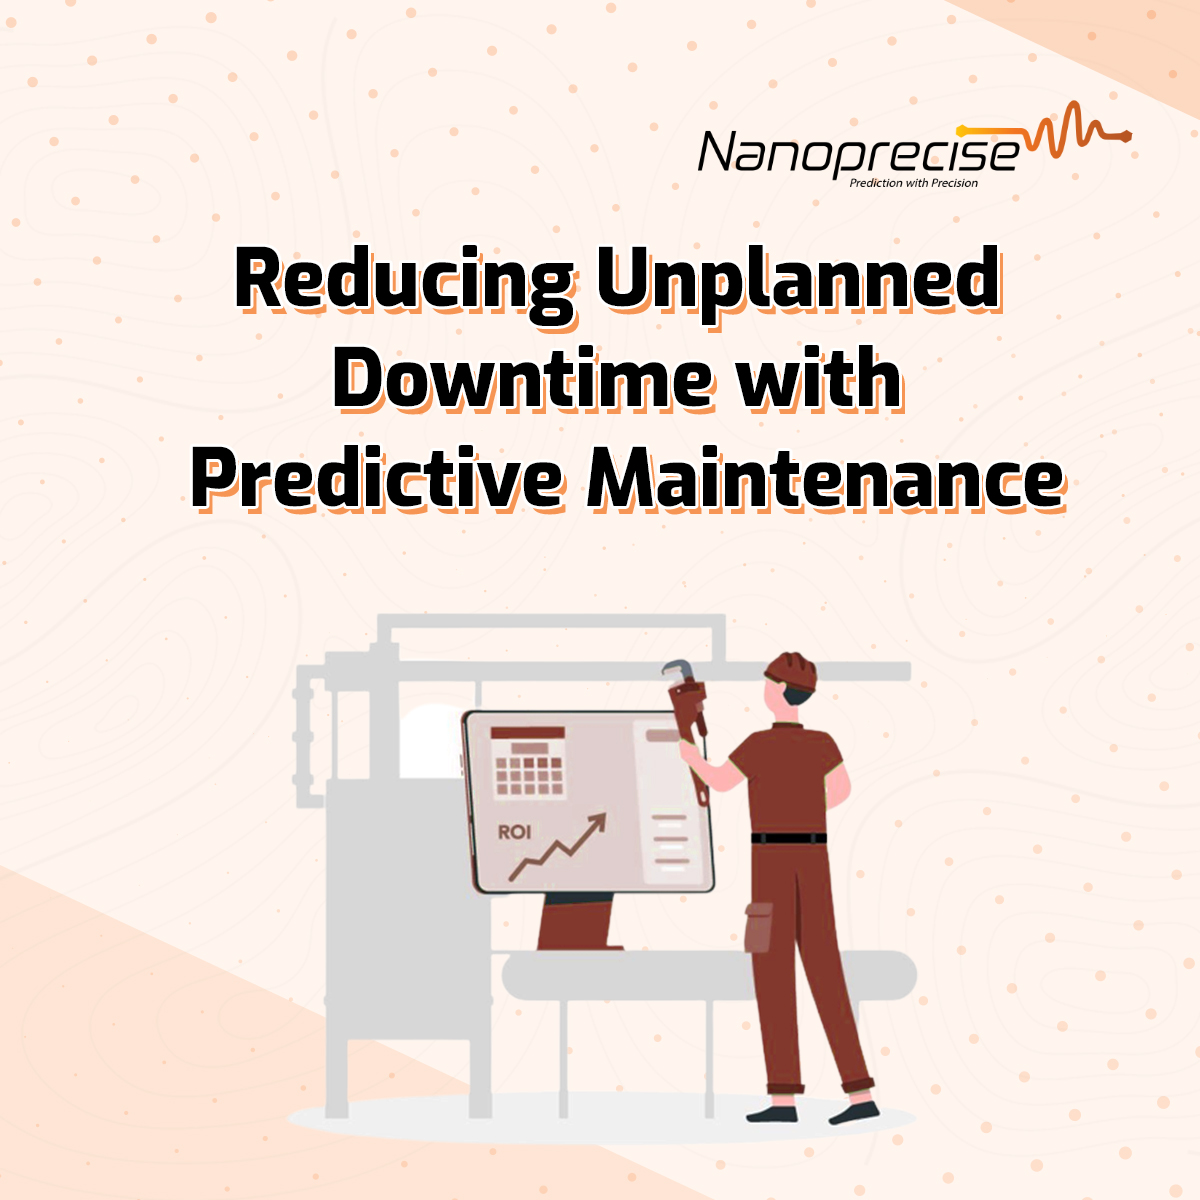 Reducing Unplanned downtime with predictive maintenace